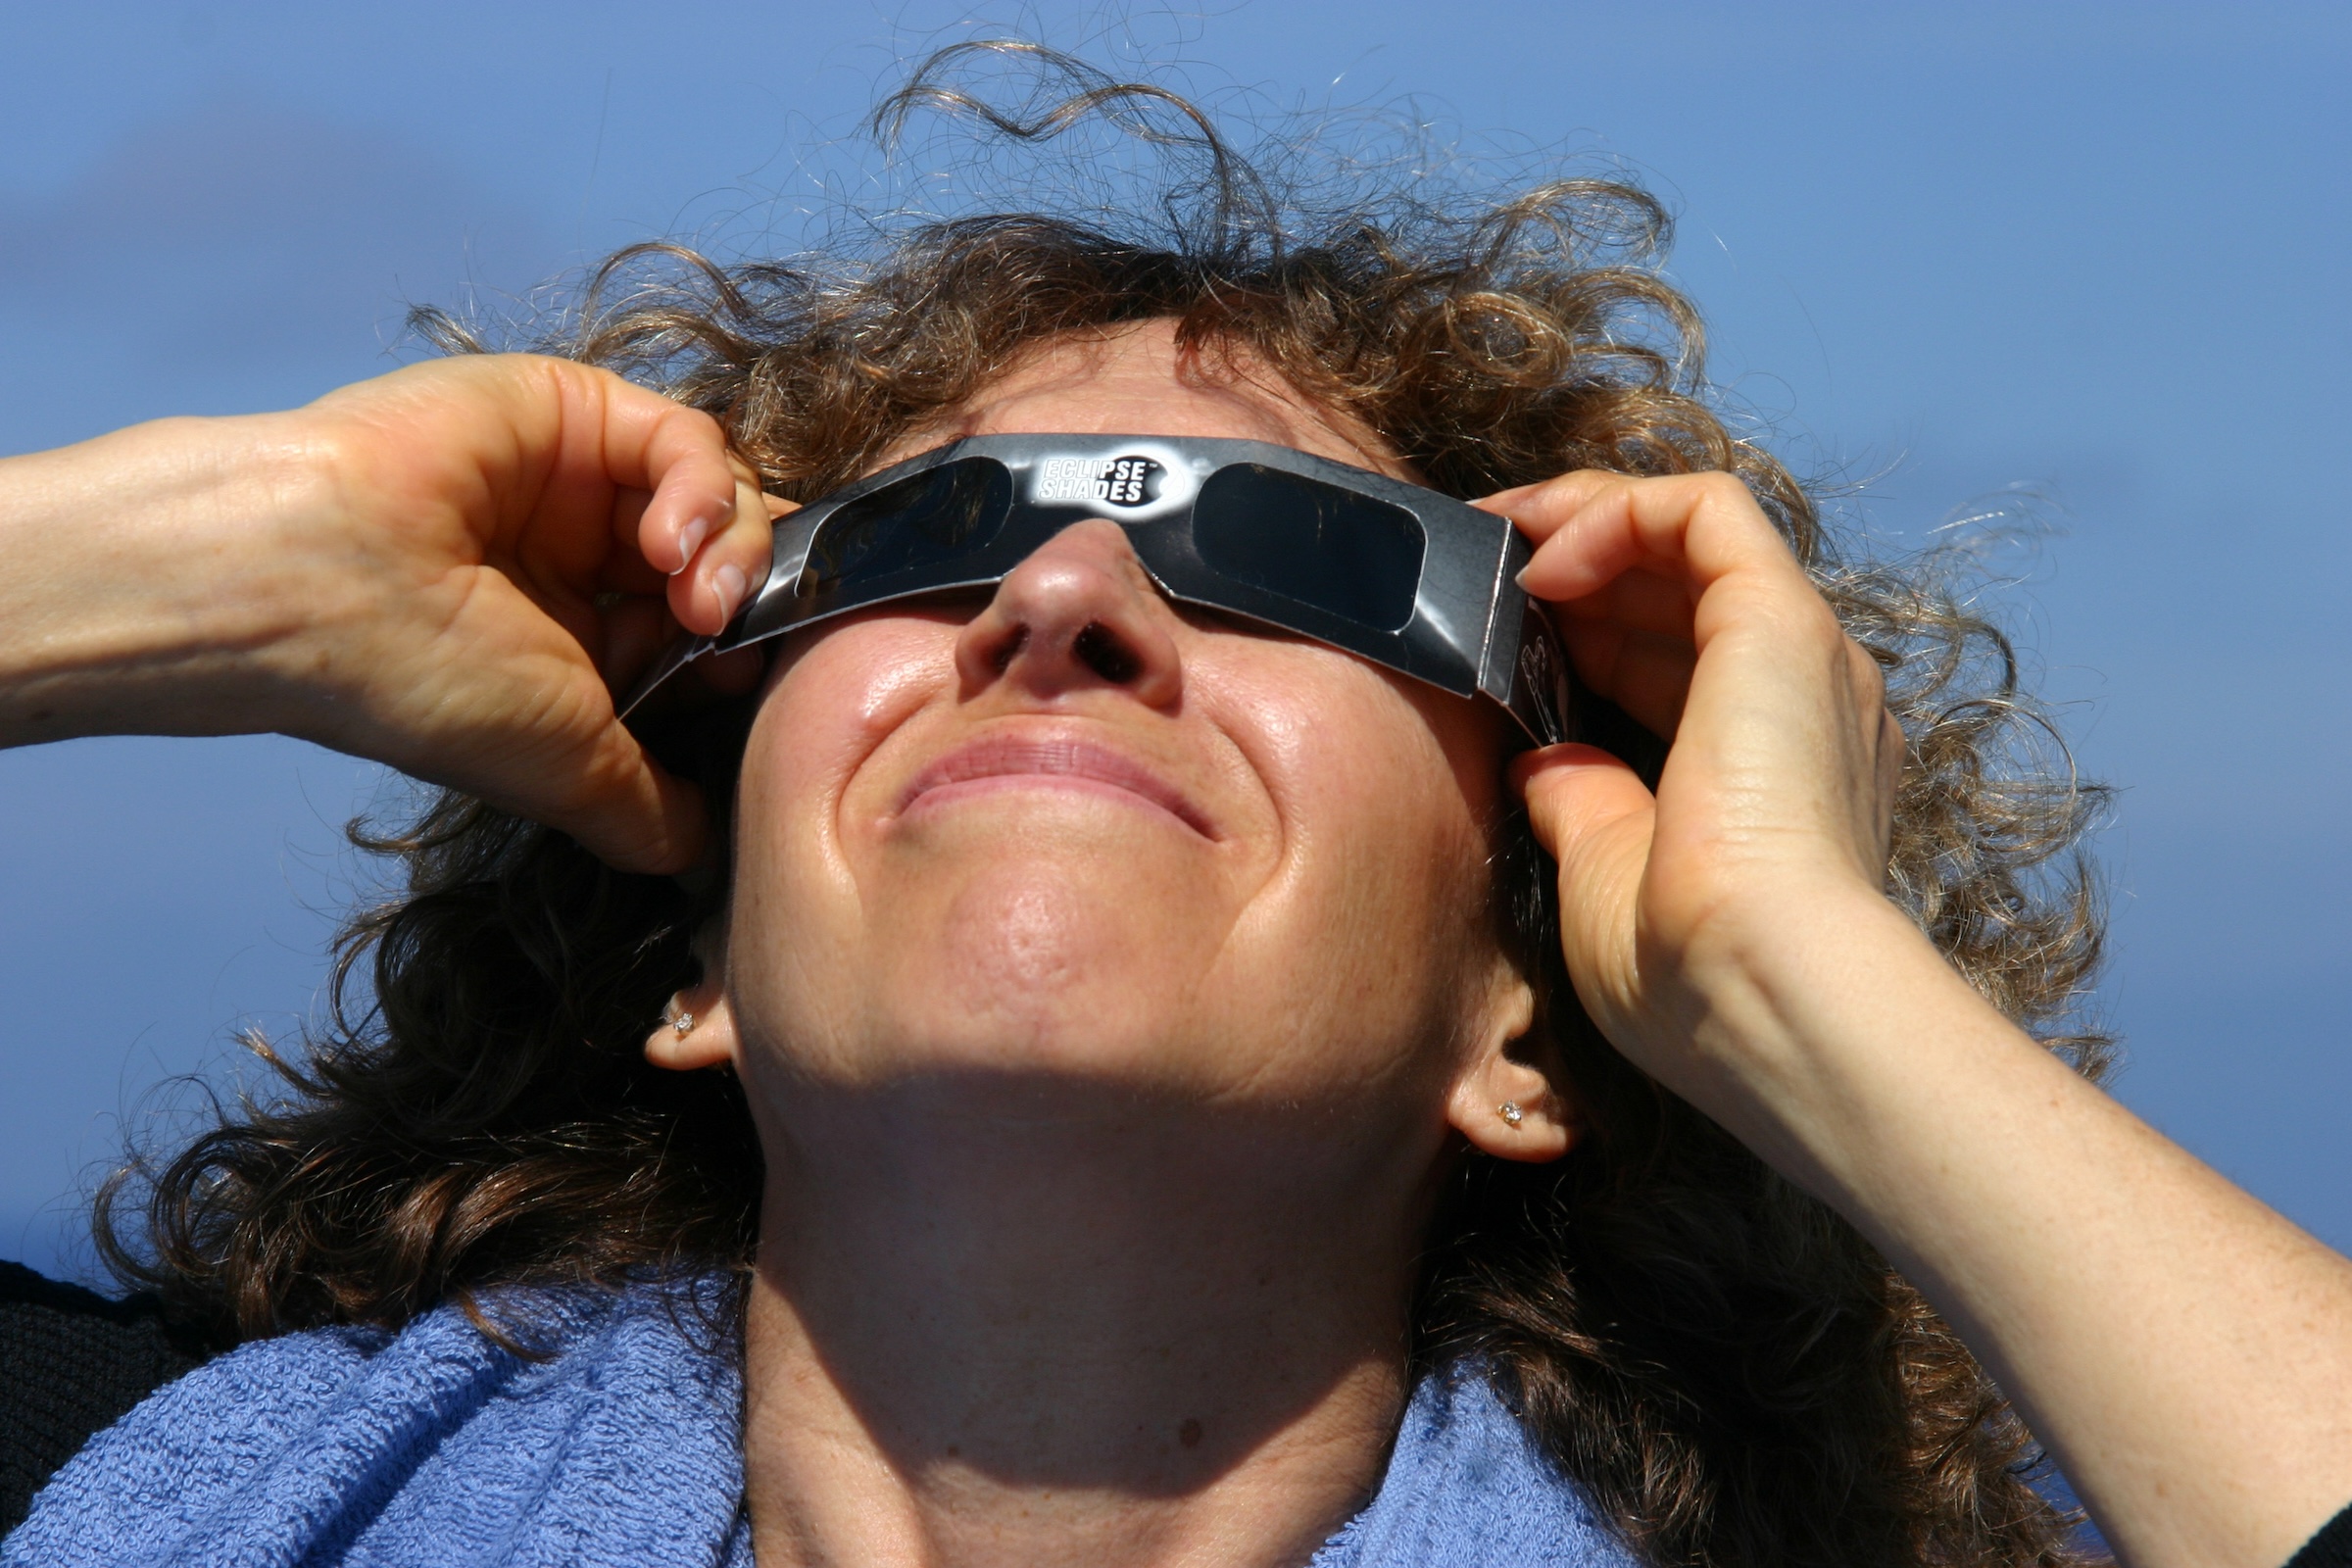 A woman dawns protective eclipse glasses and looks at the sun on a cloudless day